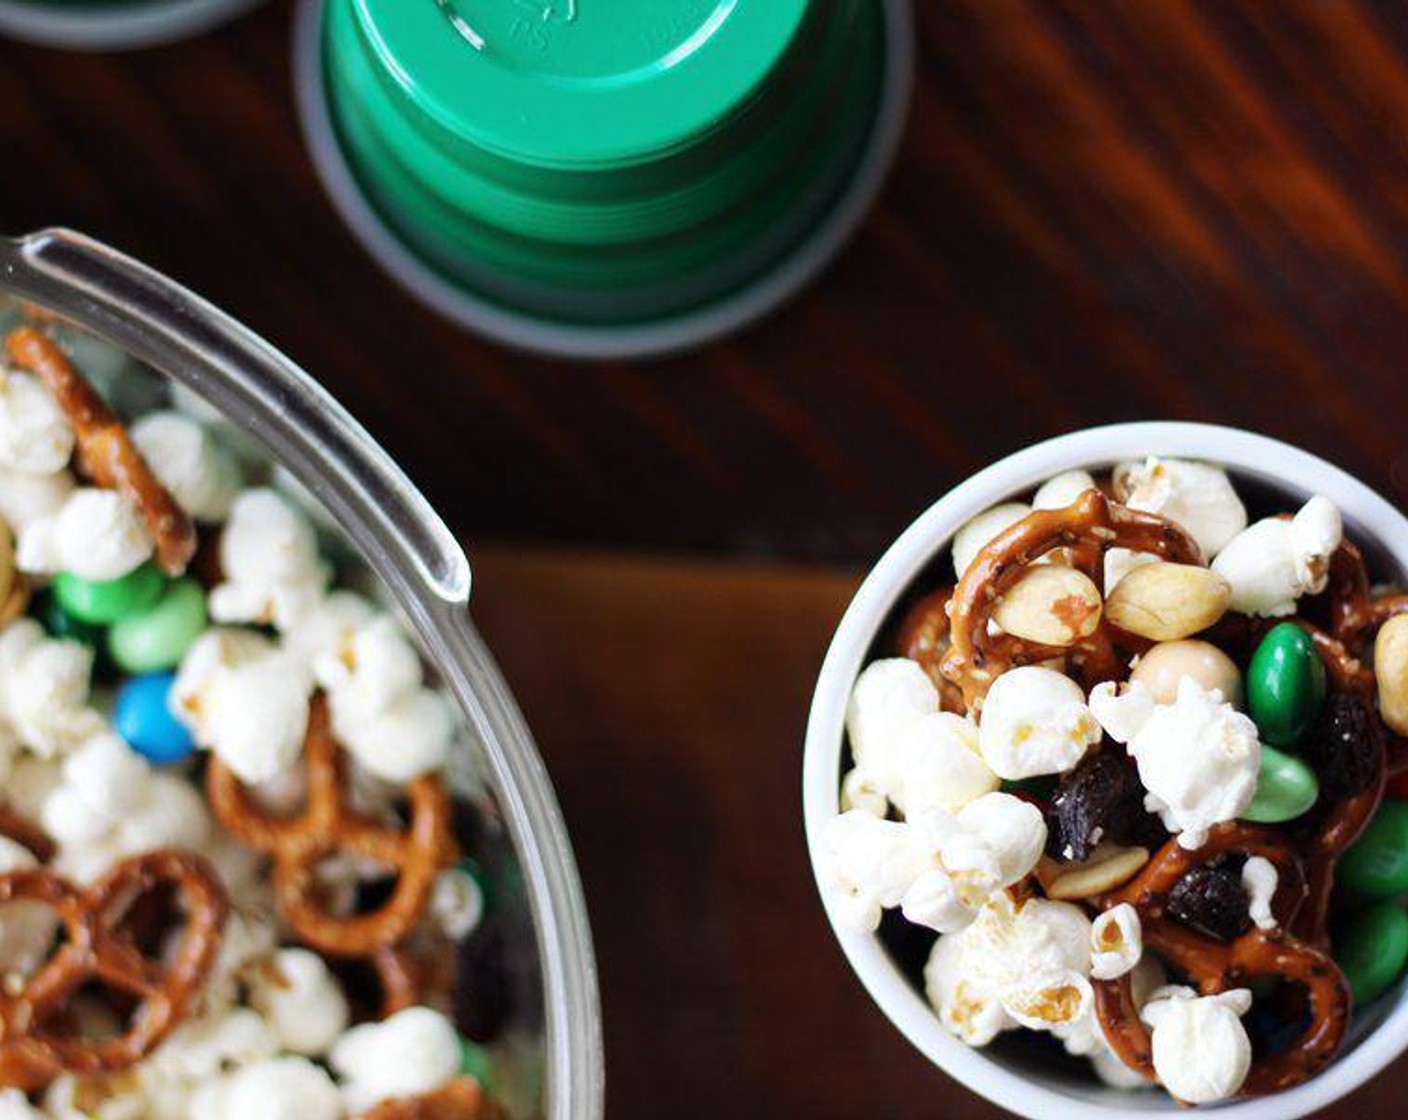 step 1 Combine Popcorn (5 cups), M&M's® Milk Chocolate Candy (4 cups), Trail Mix (3 cups), Mini Pretzels (3 cups) in a large bowl or container. Serve in snack cups or paper bags and enjoy!